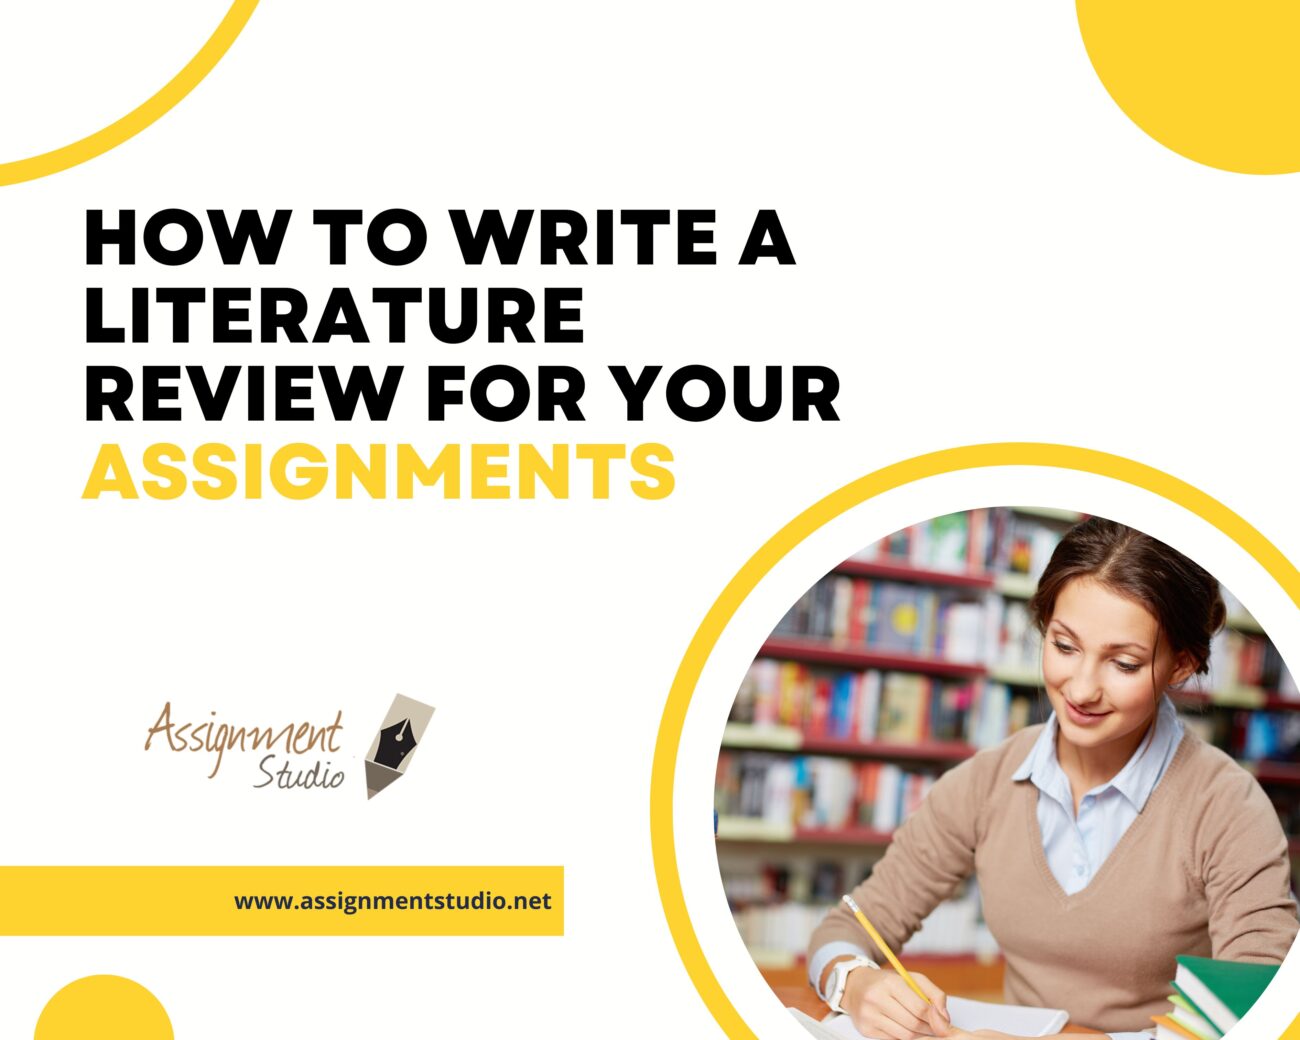 How to Write a Literature Review for Your Assignments